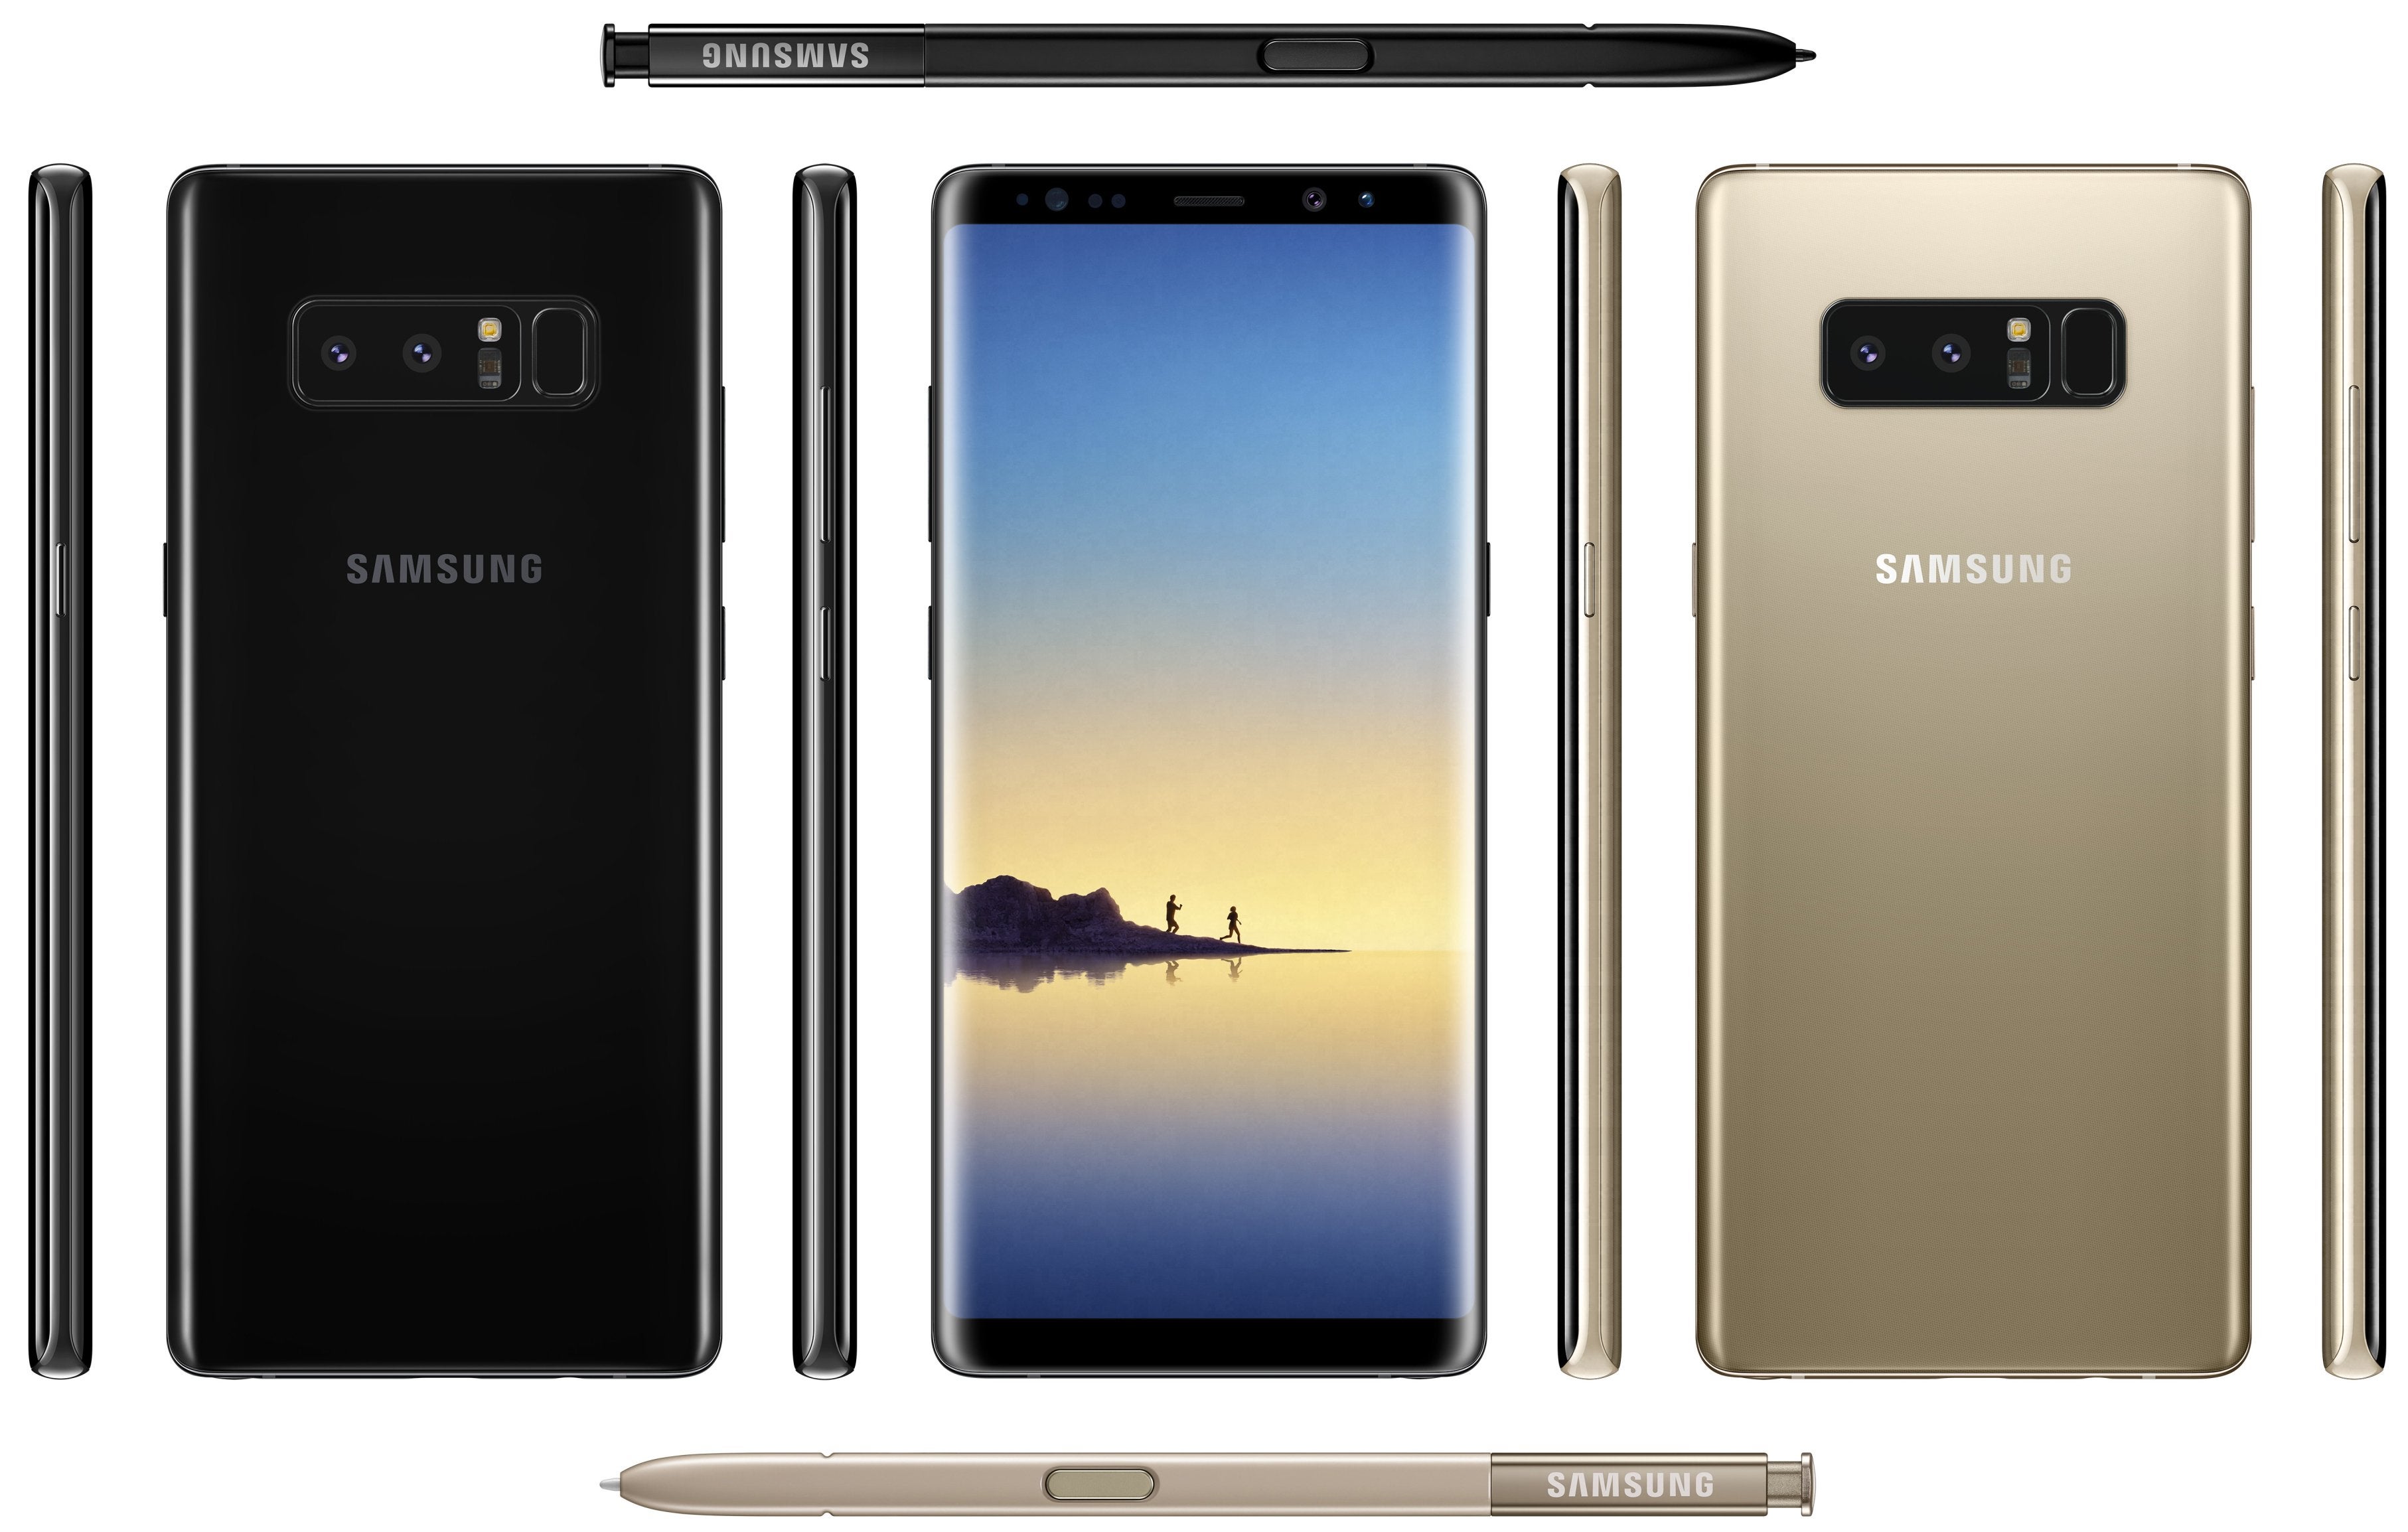 Here is the Galaxy Note 8 from all four sides, complete with S Pen and a new color option